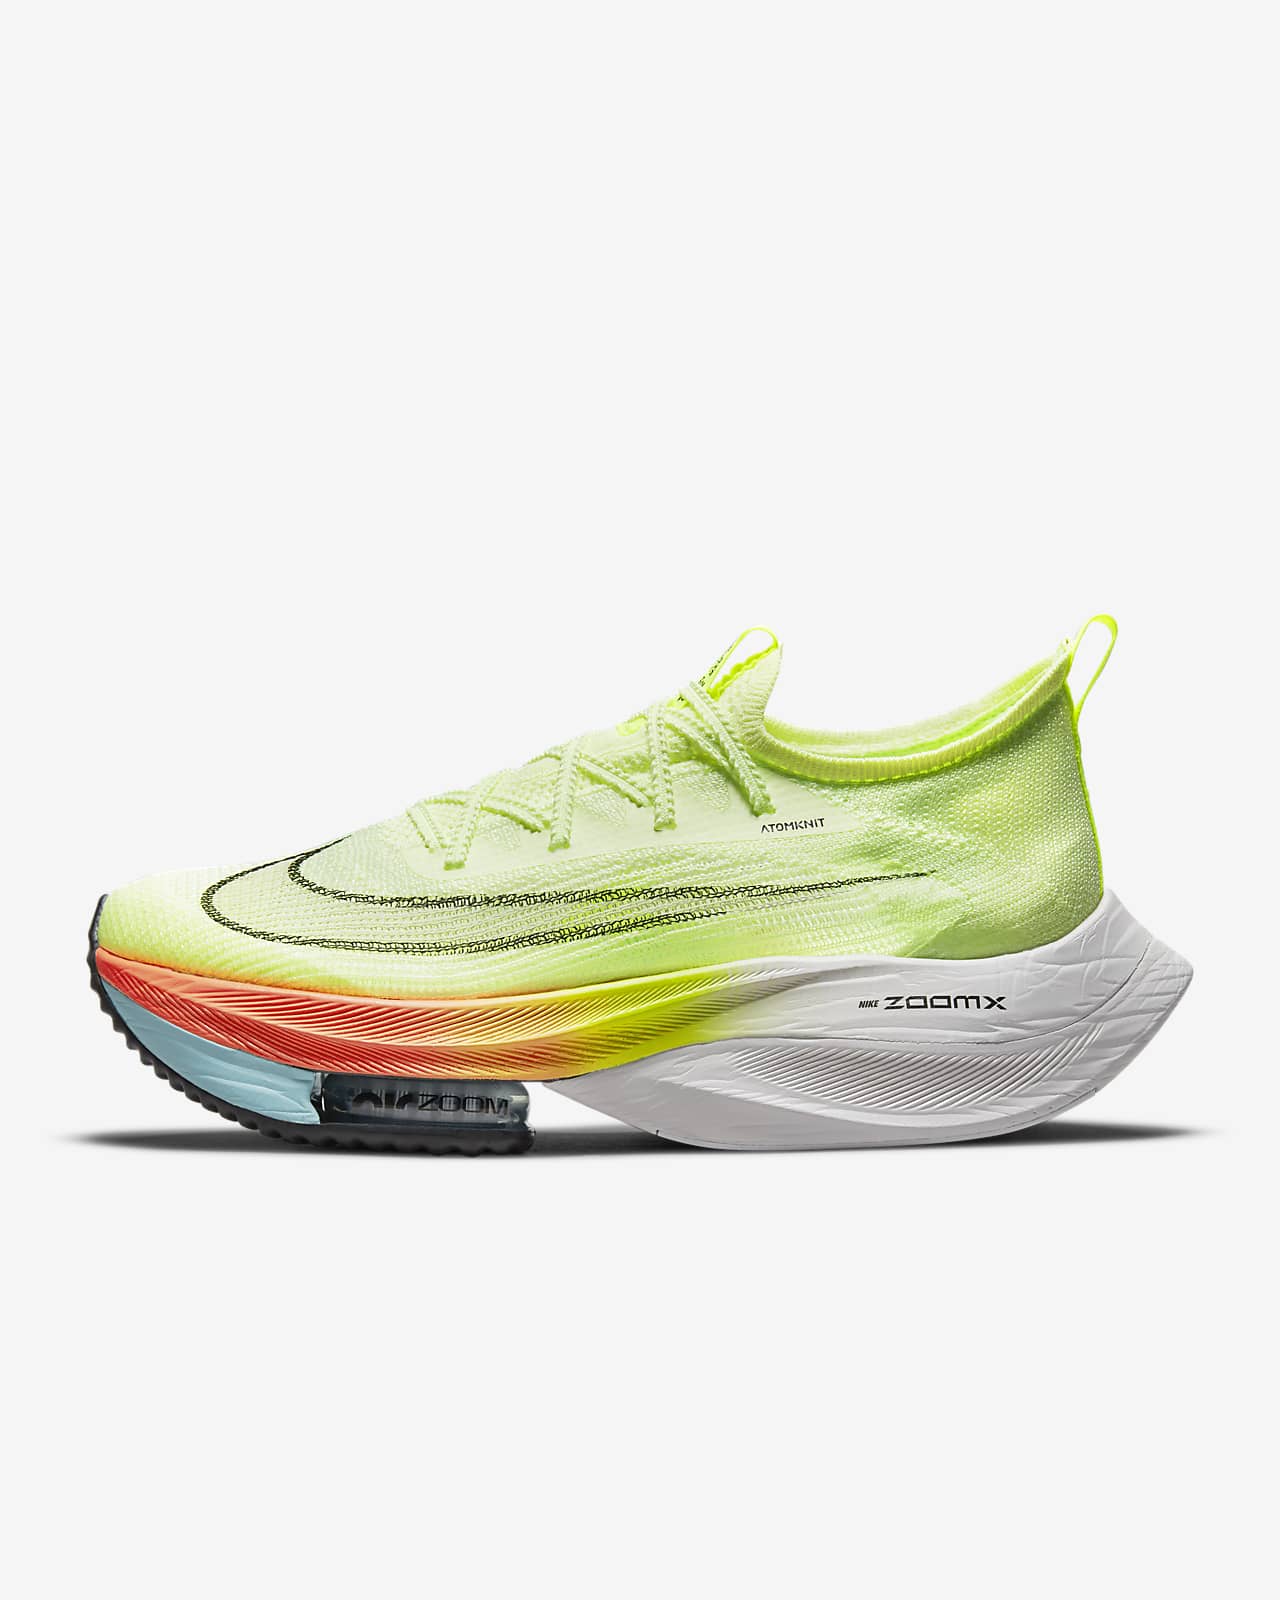 Nike Air Zoom Alphafly NEXT% Road Racing Shoes. Nike